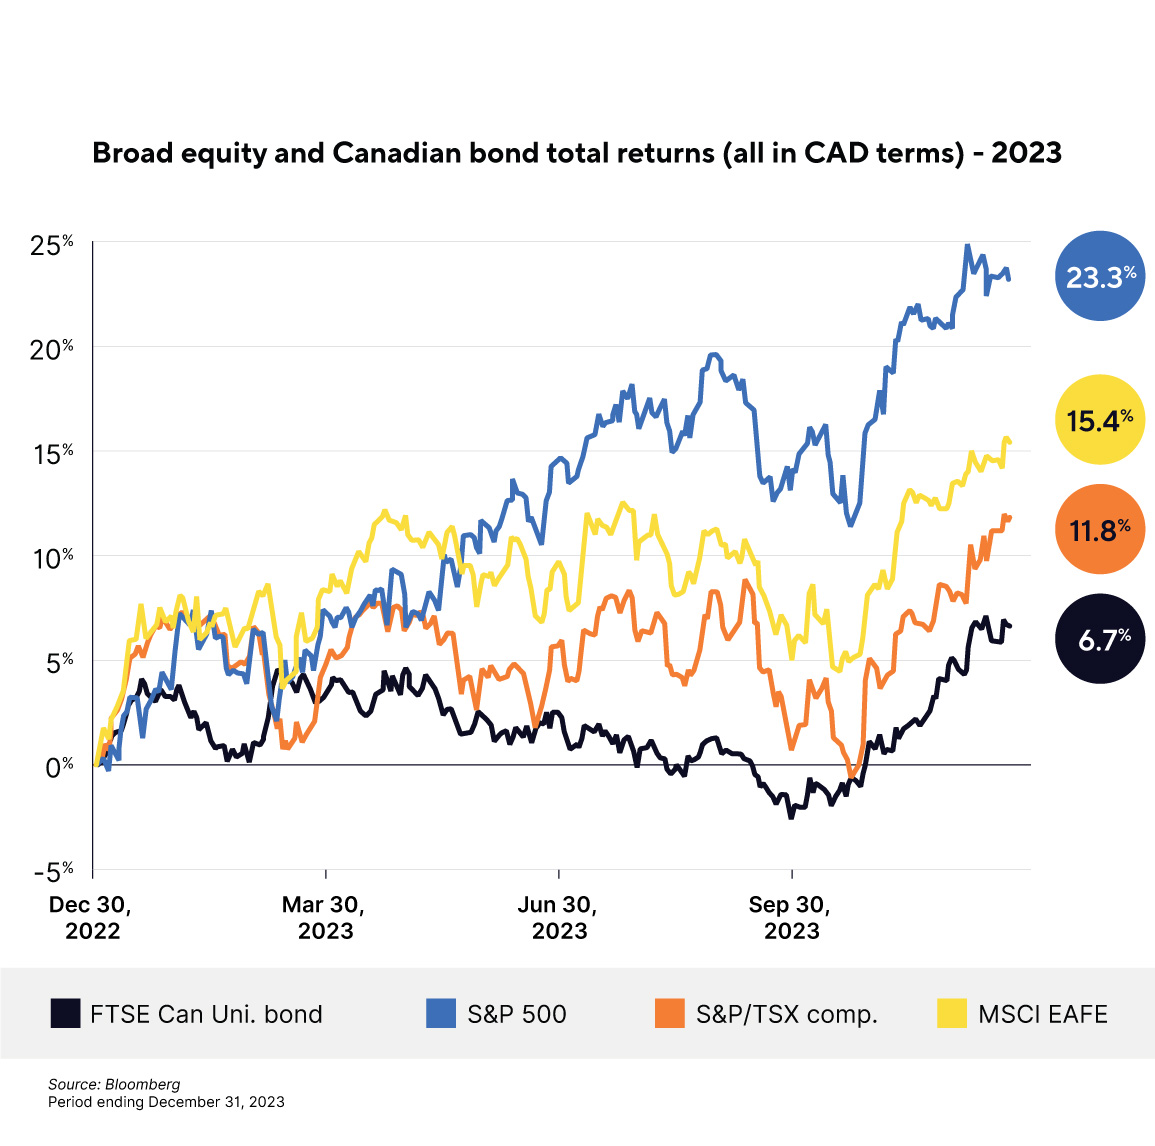 Broad equity and Canadian bond total returns